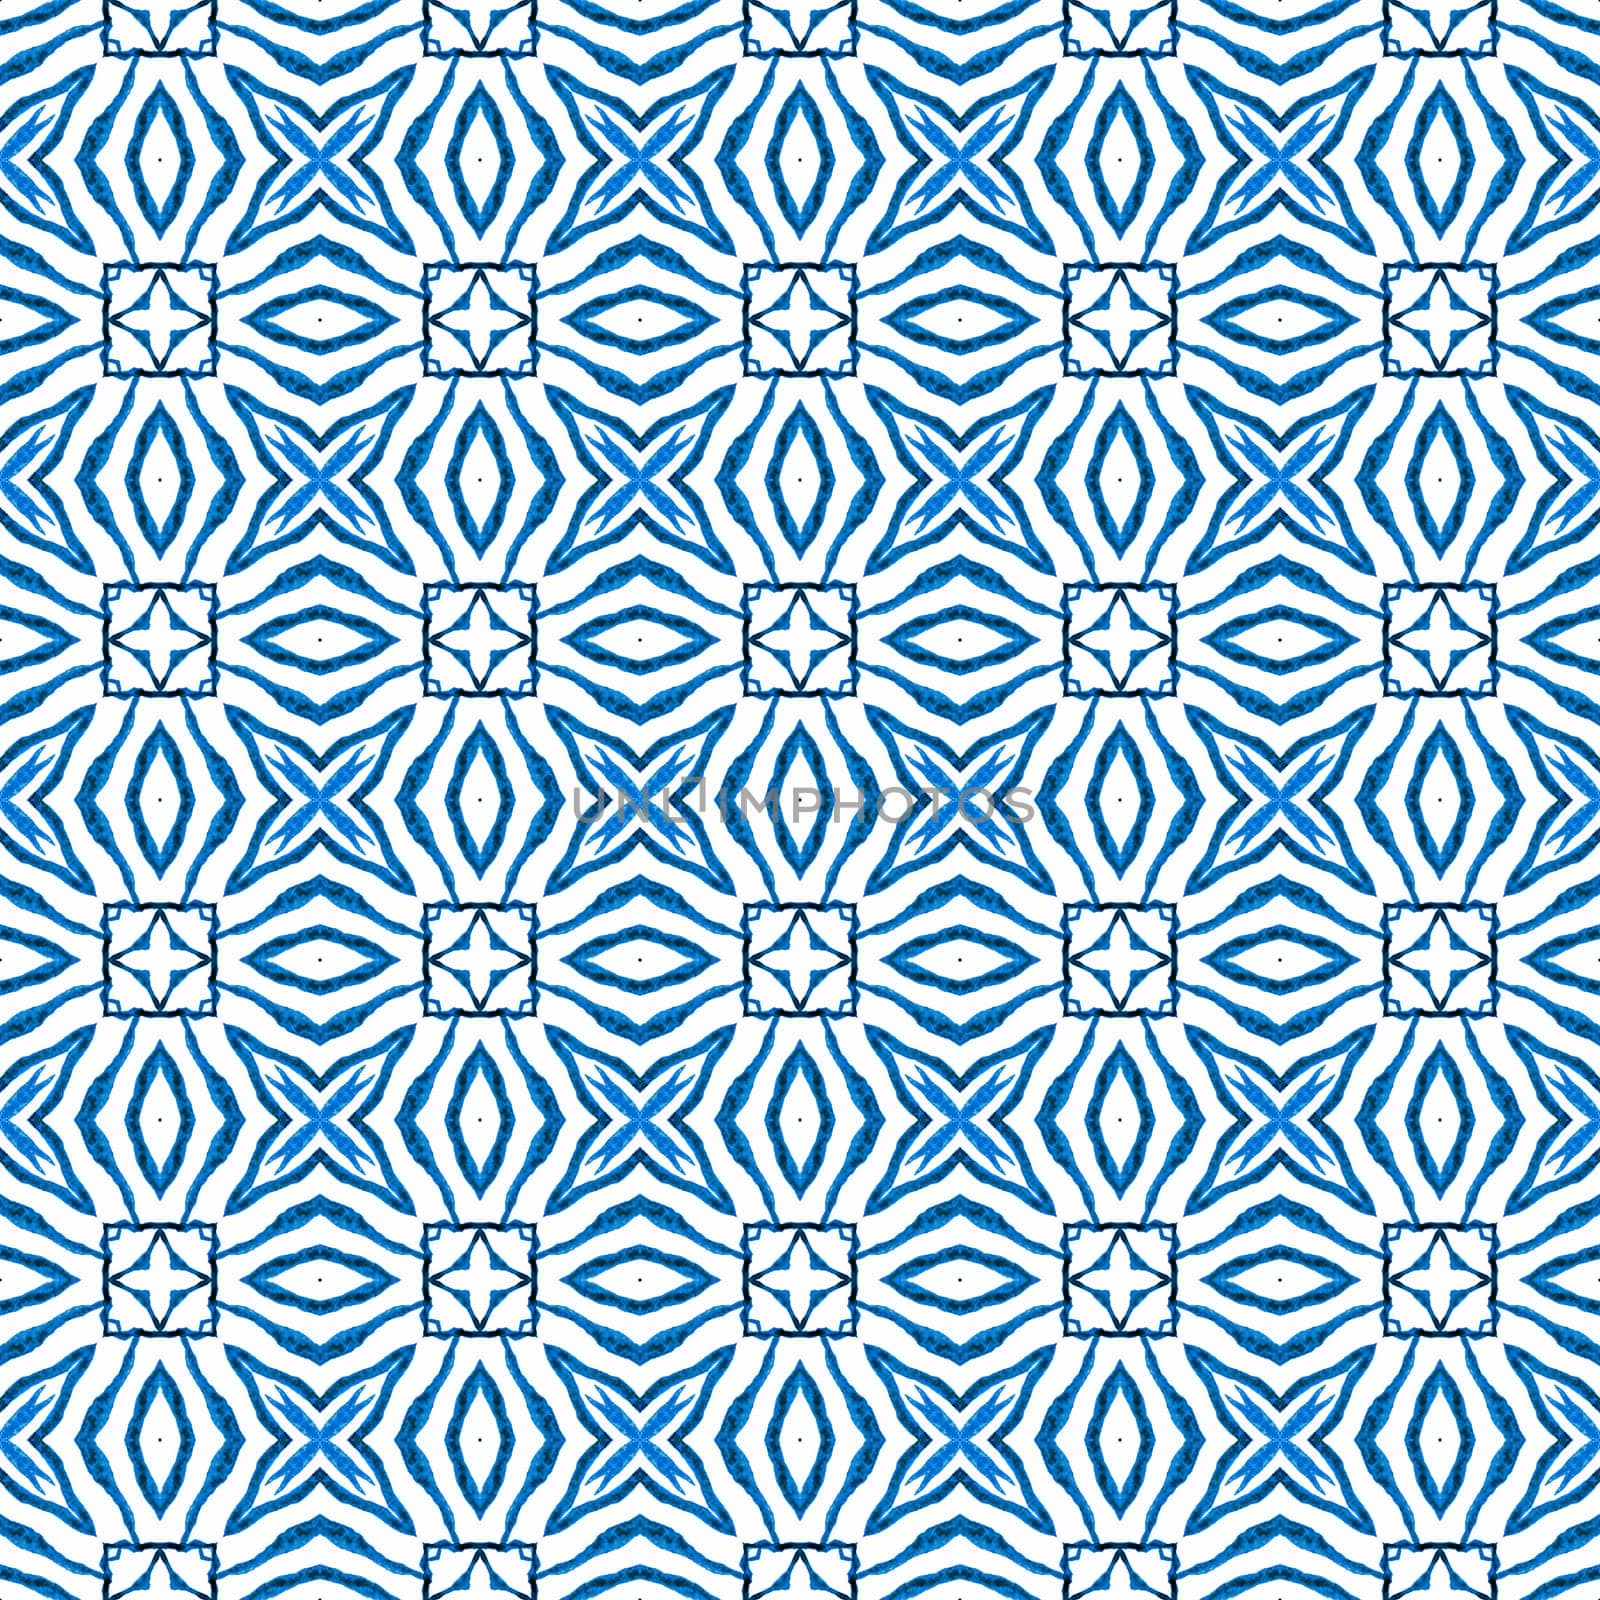 Textile ready vibrant print, swimwear fabric, wallpaper, wrapping. Blue ecstatic boho chic summer design. Ethnic hand painted pattern. Watercolor summer ethnic border pattern.